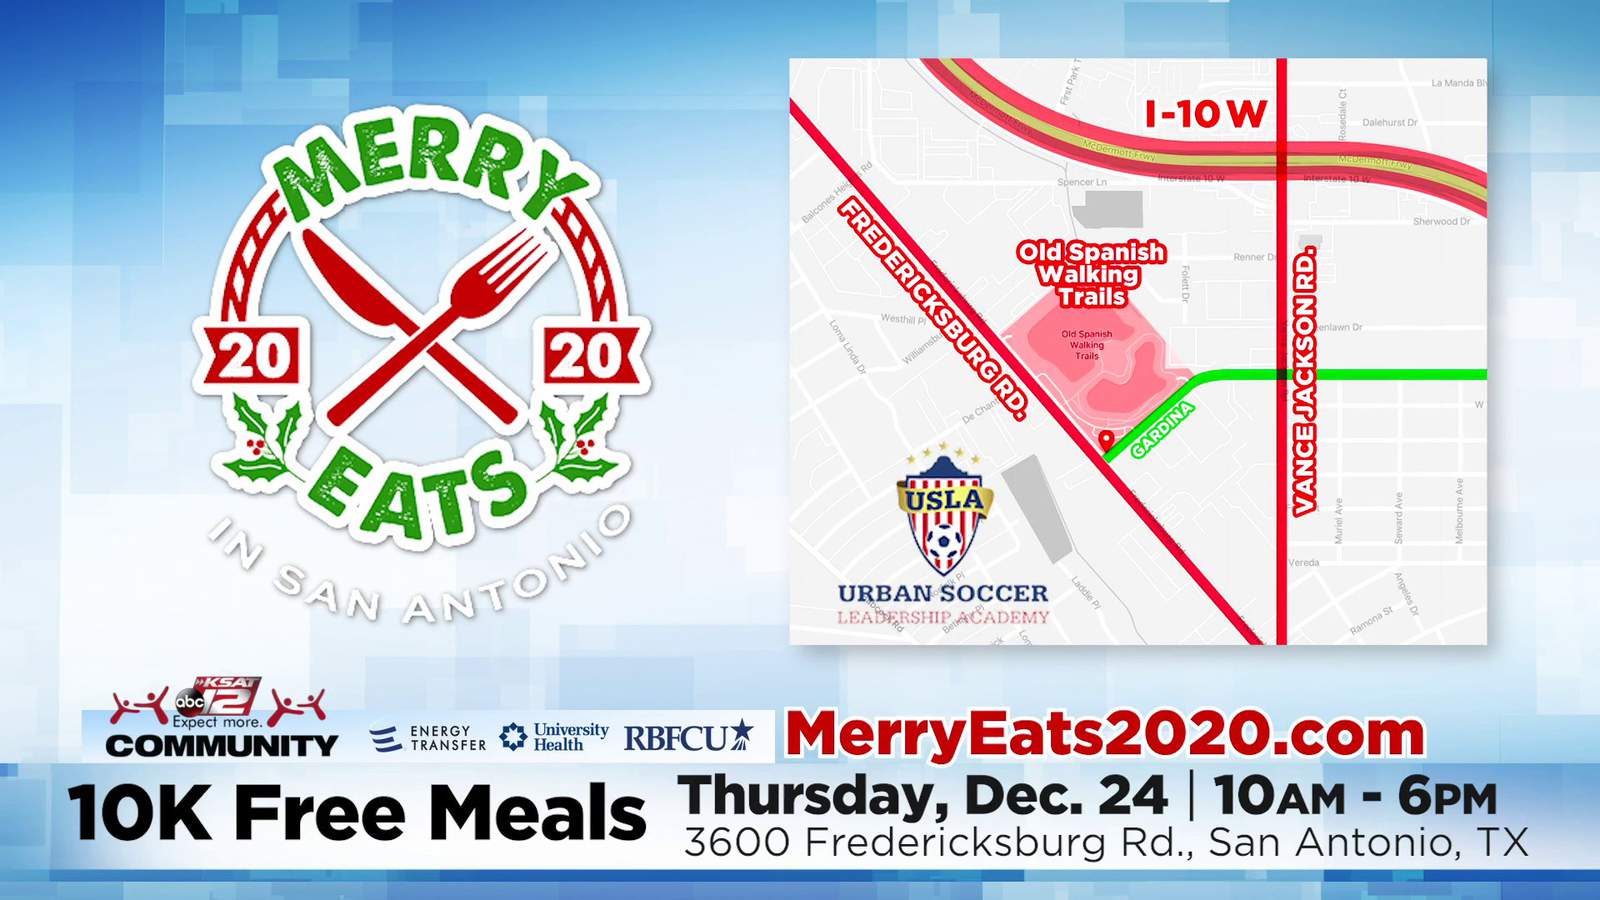 KSAT Community: You’re invited to attend Merry Eats! A free drive-thru event this Christmas Eve to help feed the community